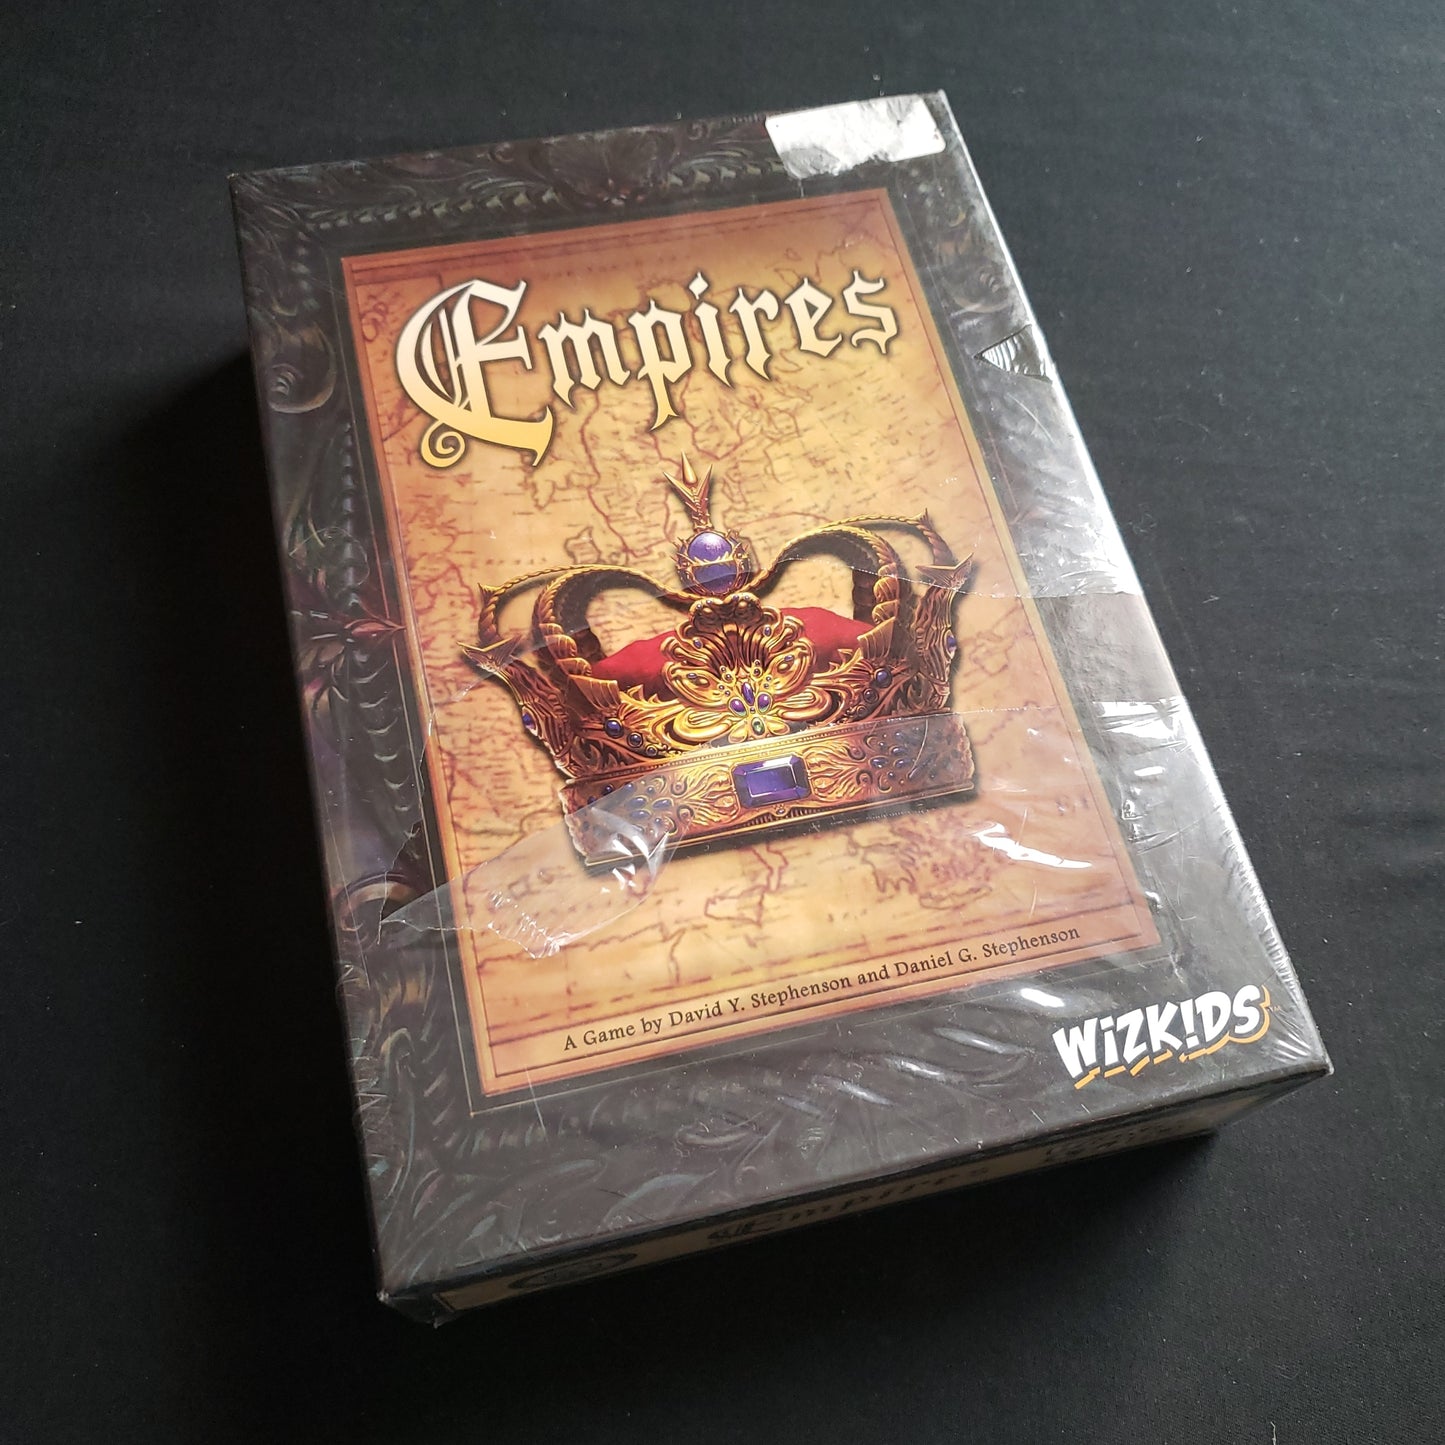 Image shows the front cover of the box of the Empires board game